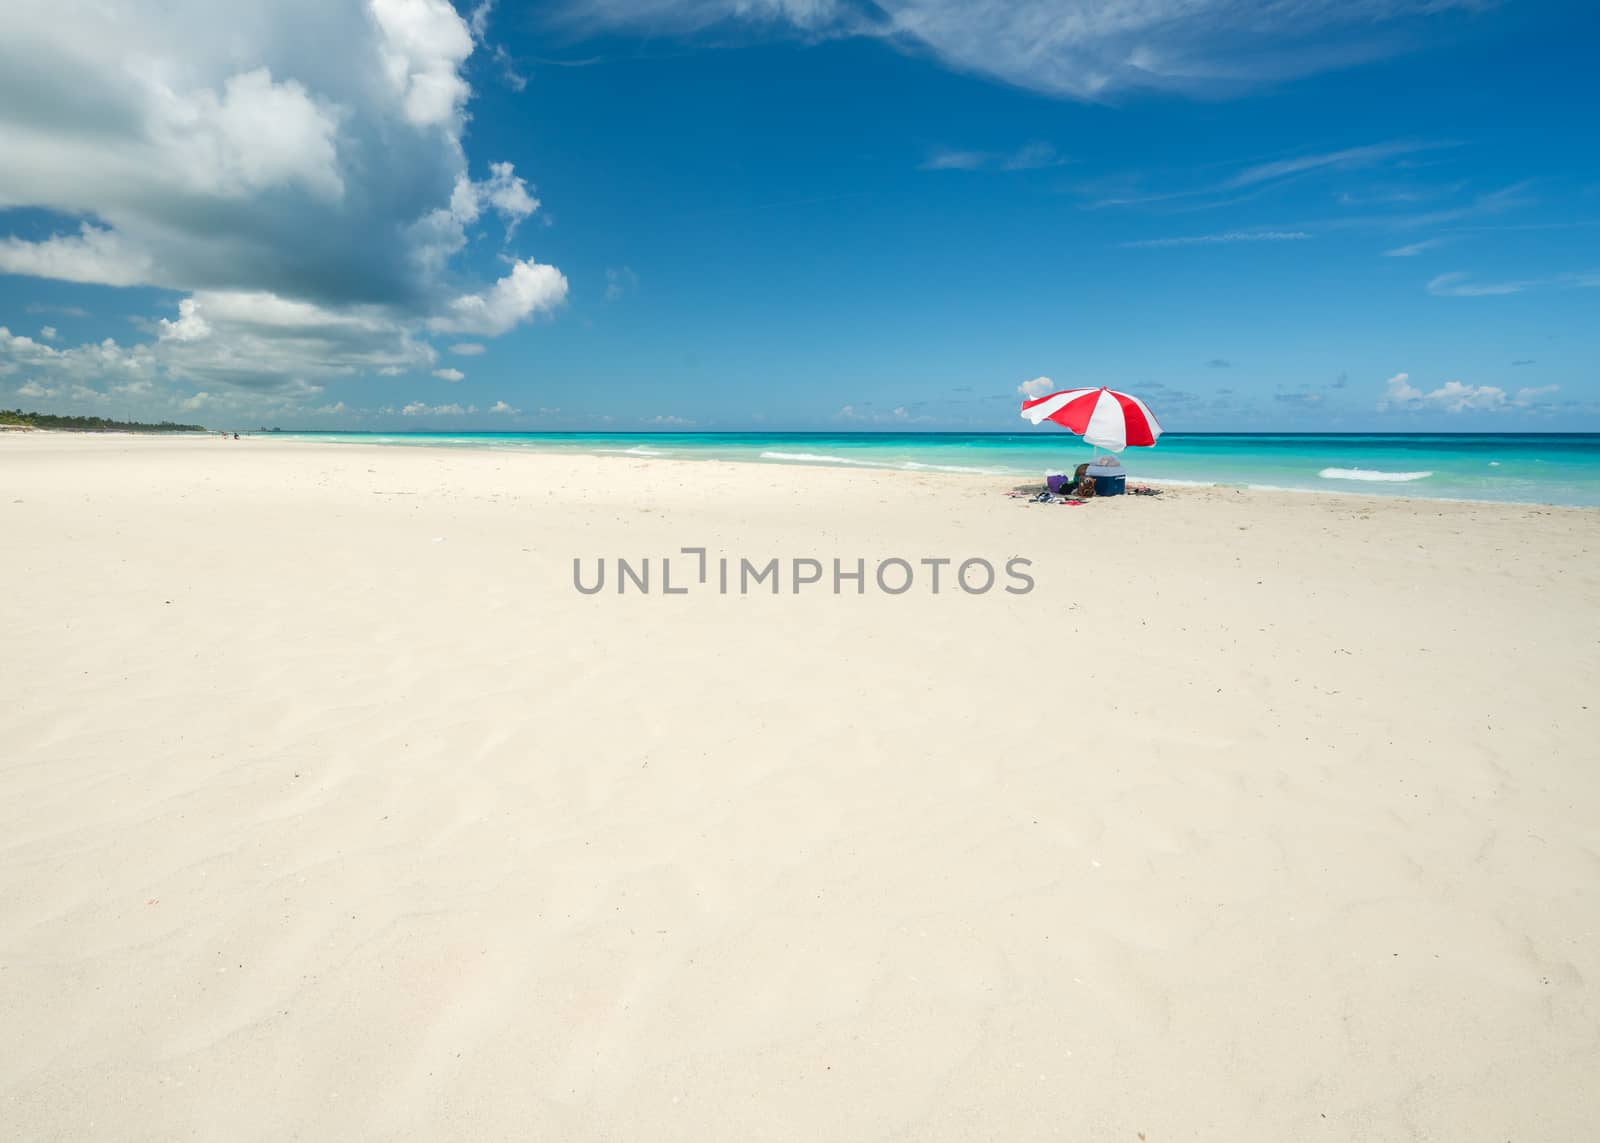 Wonderful  beach of Varadero during a sunny day, fine white sand and turquoise and green Caribbean sea,on the right one red parasol,Cuba.concept  photo,copy space.